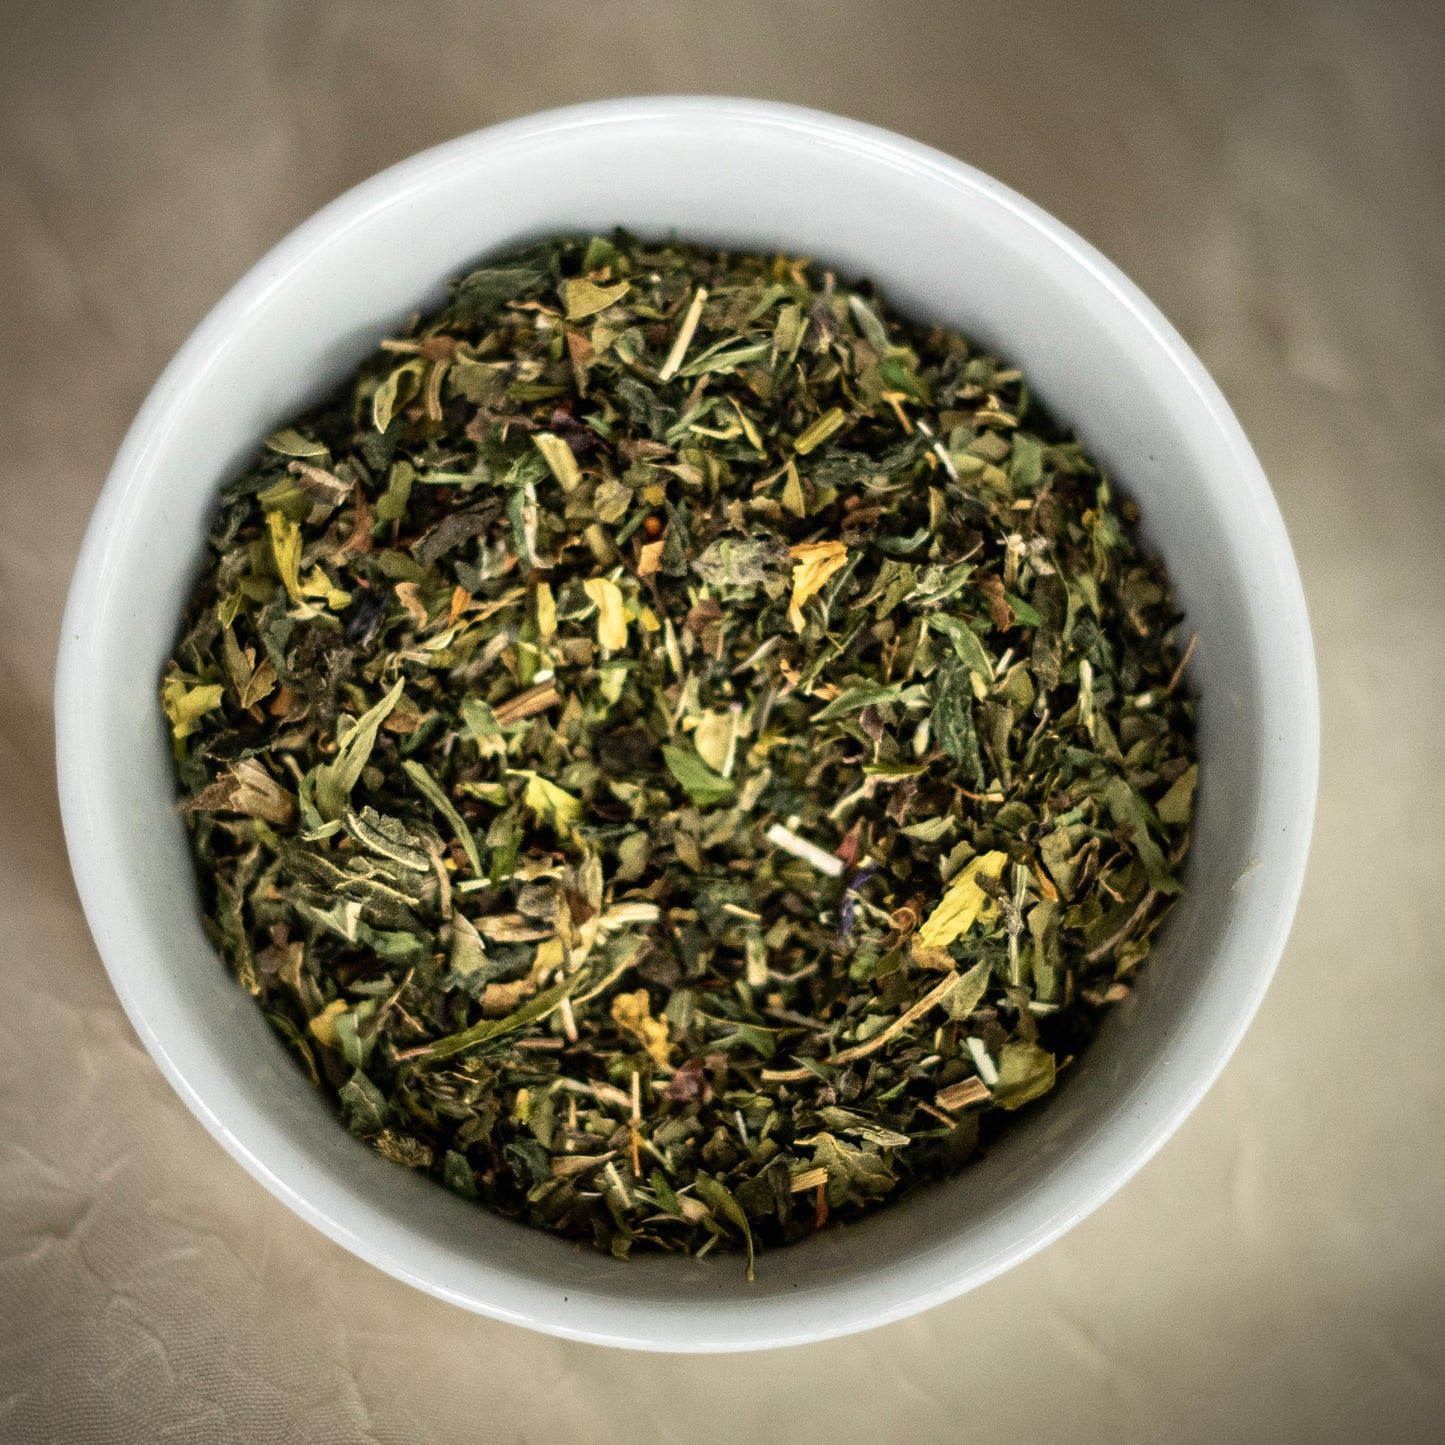 dandelion teahouse's allergy free herbal tea blend in a dish